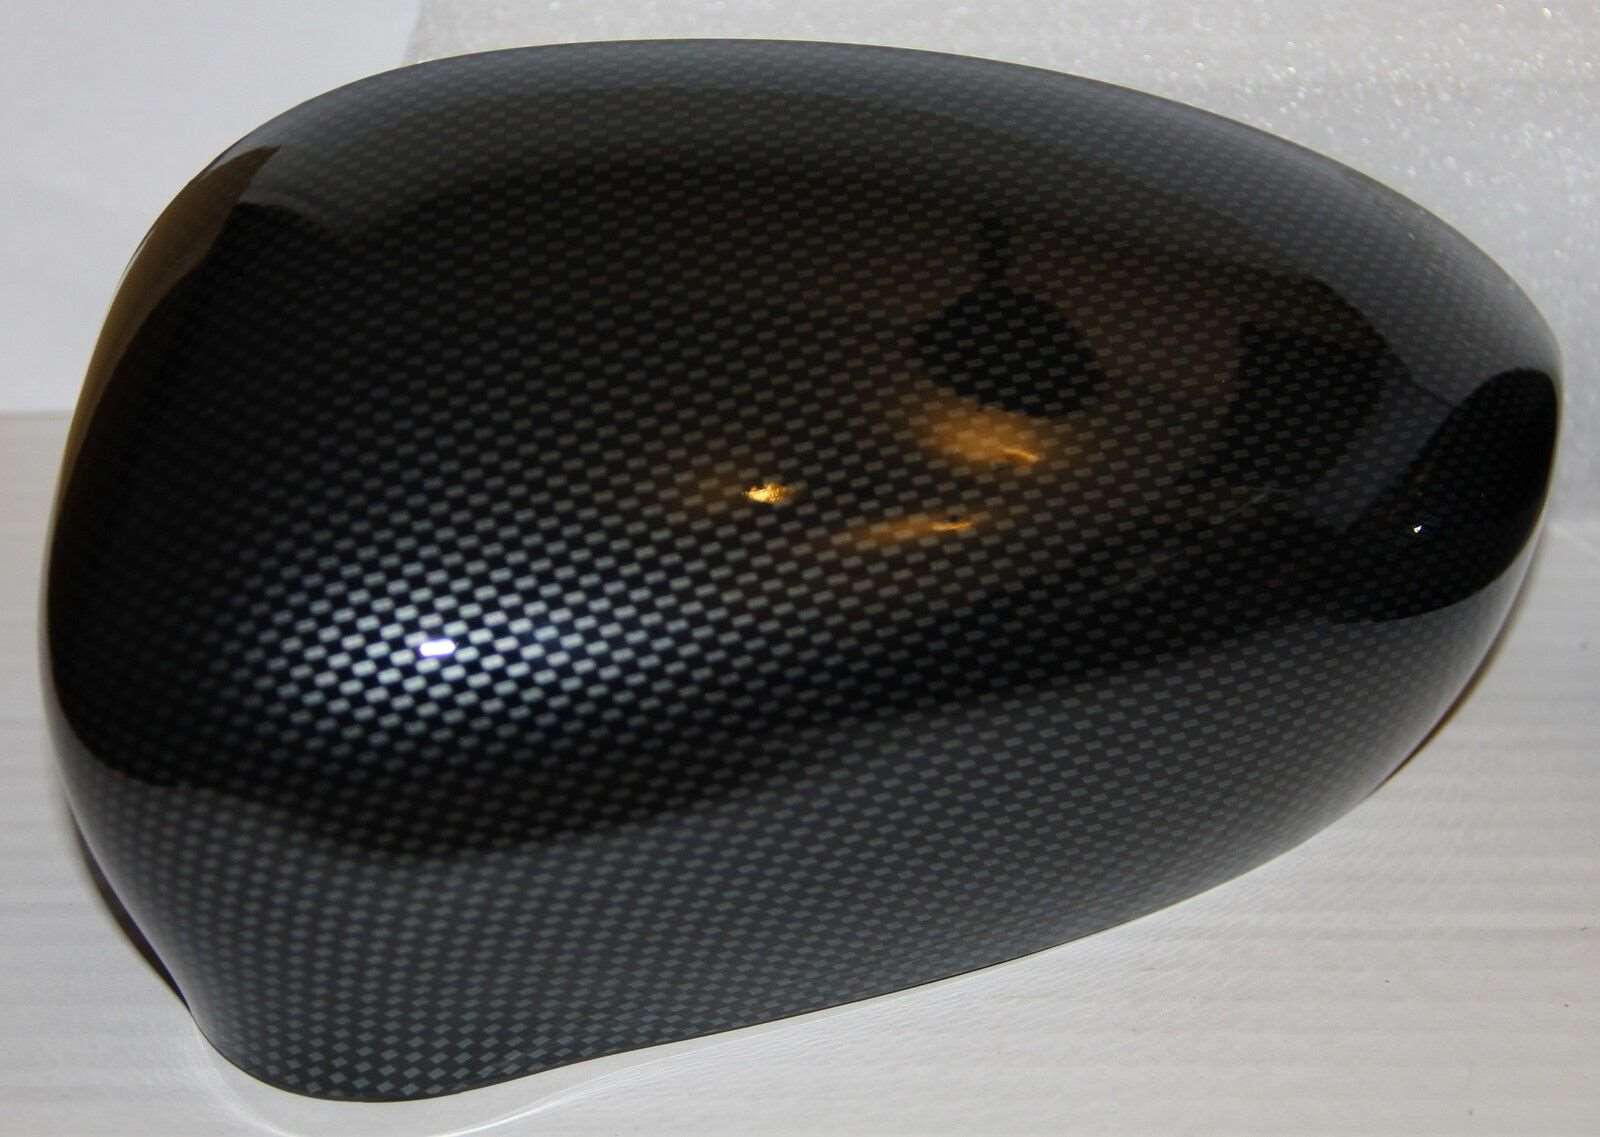 2x FIAT 500 CARBON LOOK COVER MIRROR CAPS REPLACEMENT ABARTH BRAND NEW